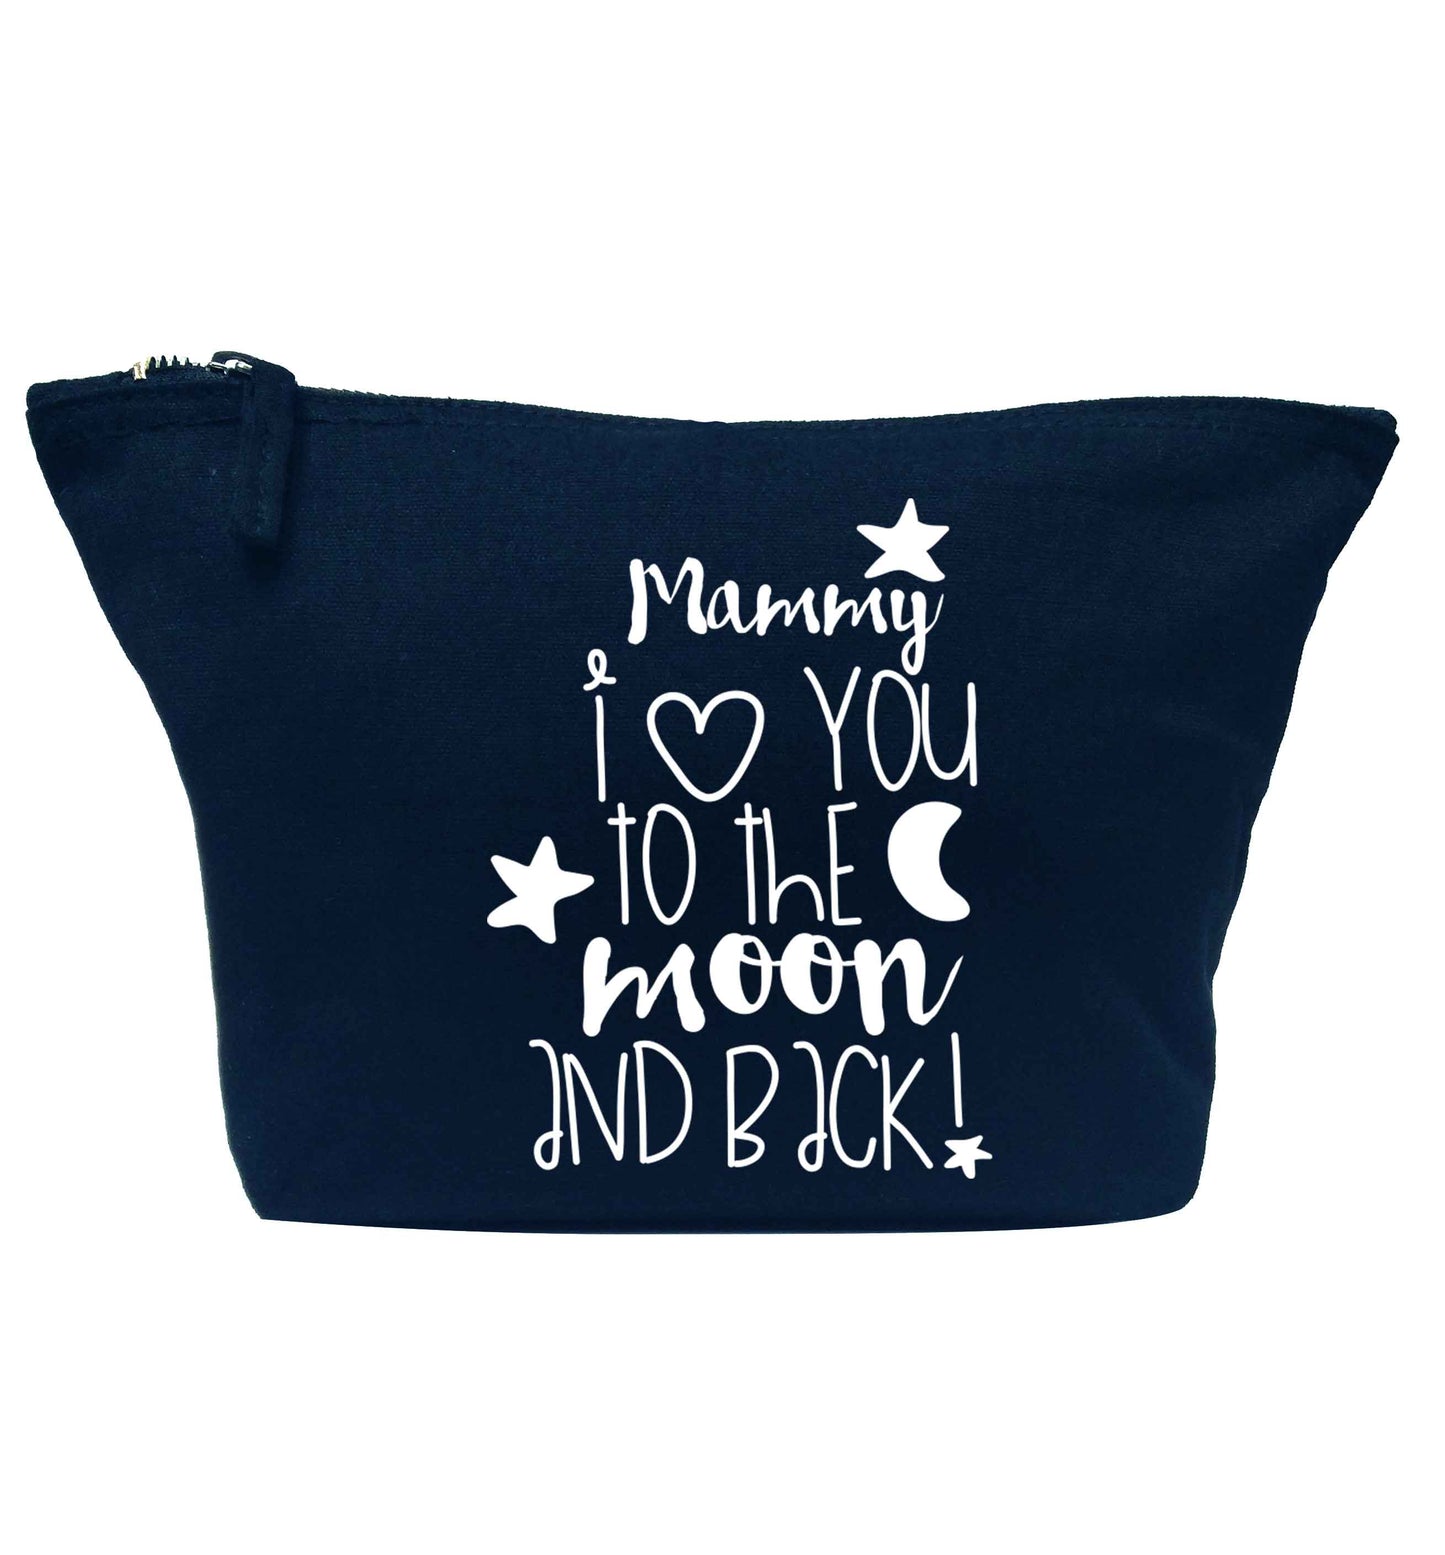 Mammy I love you to the moon and back navy makeup bag